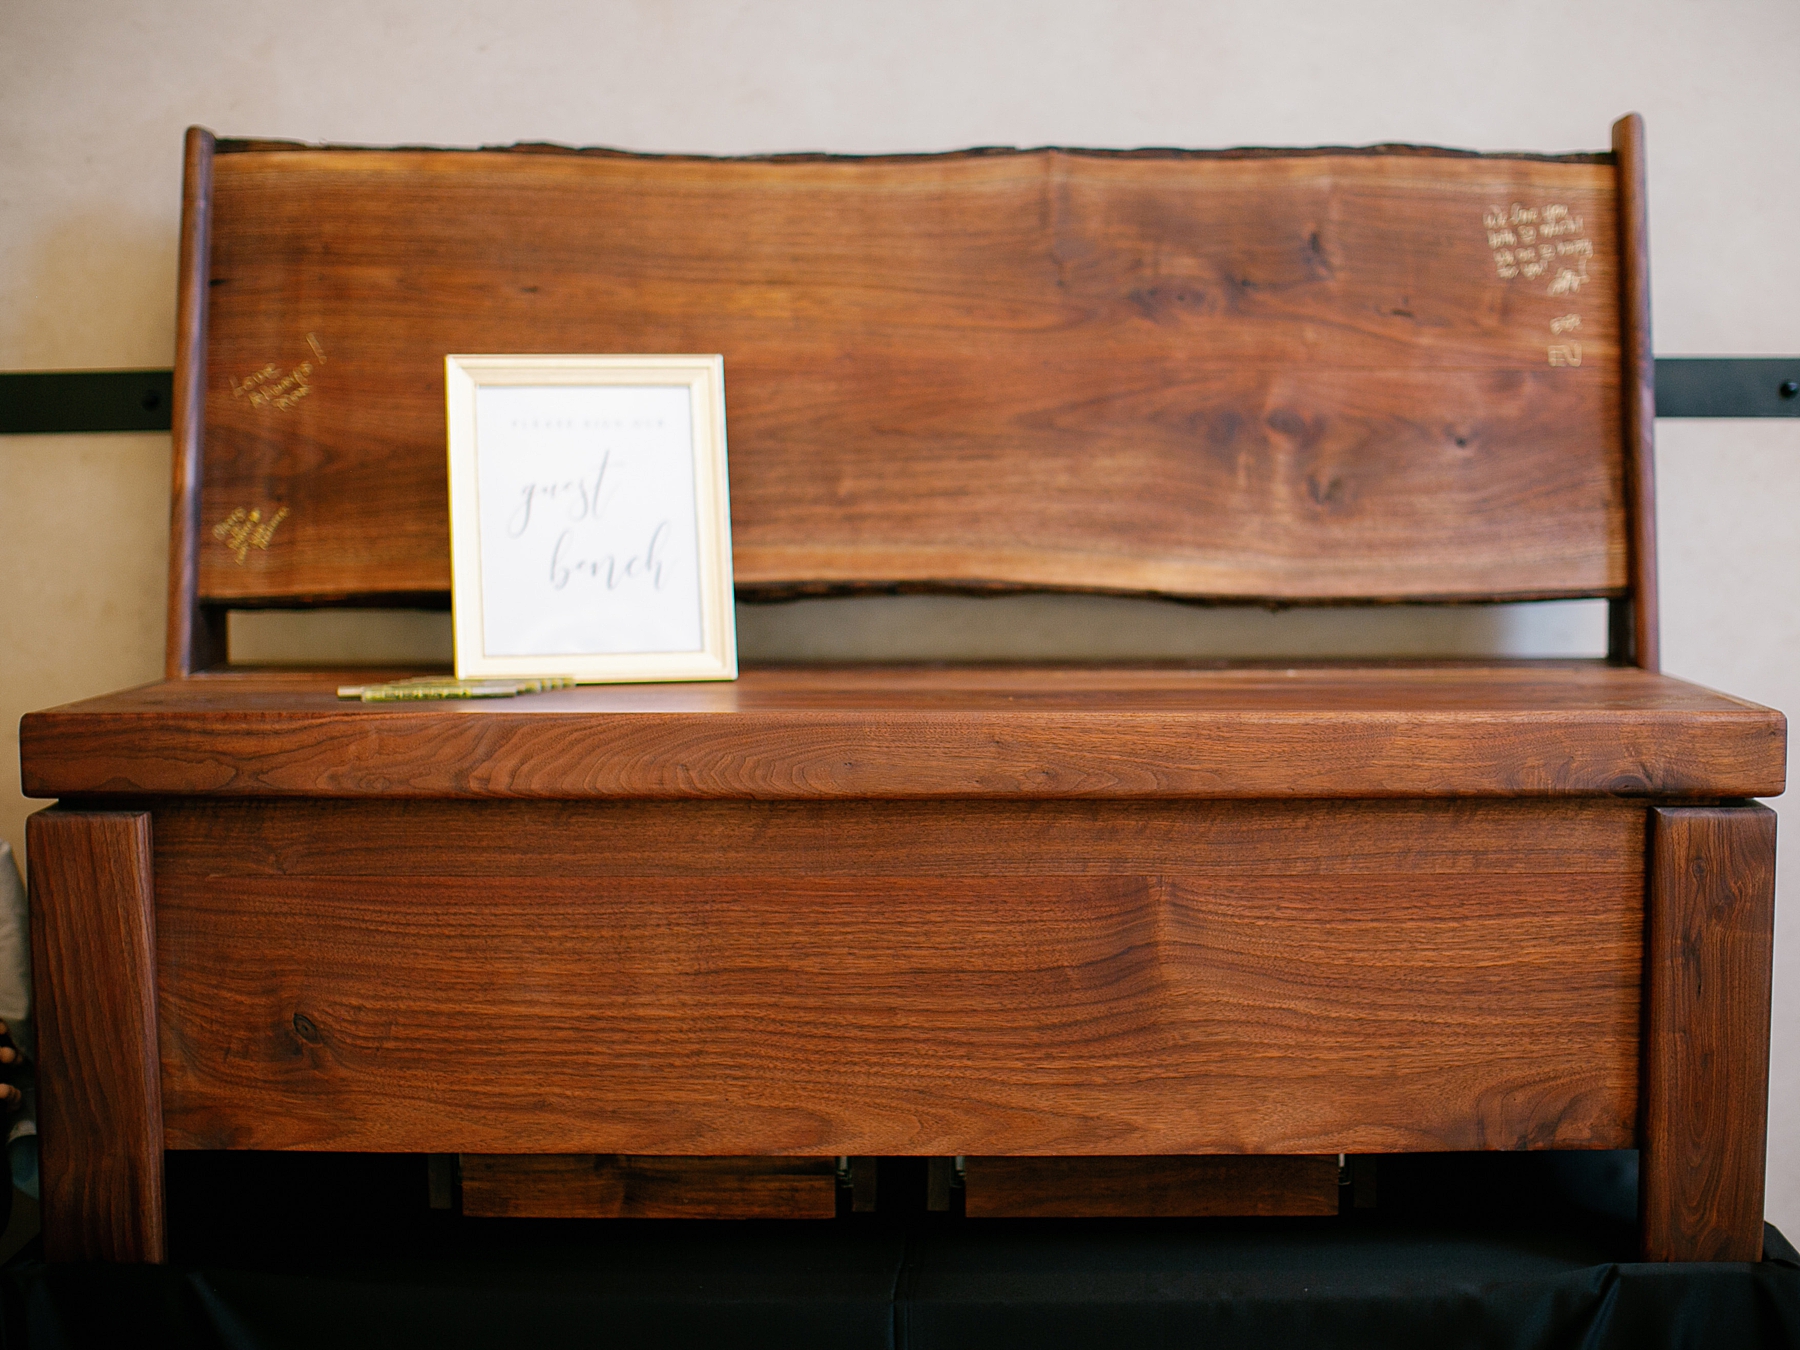 Handmade wedding guest book bench at The Boulders at Black Canyon Inn